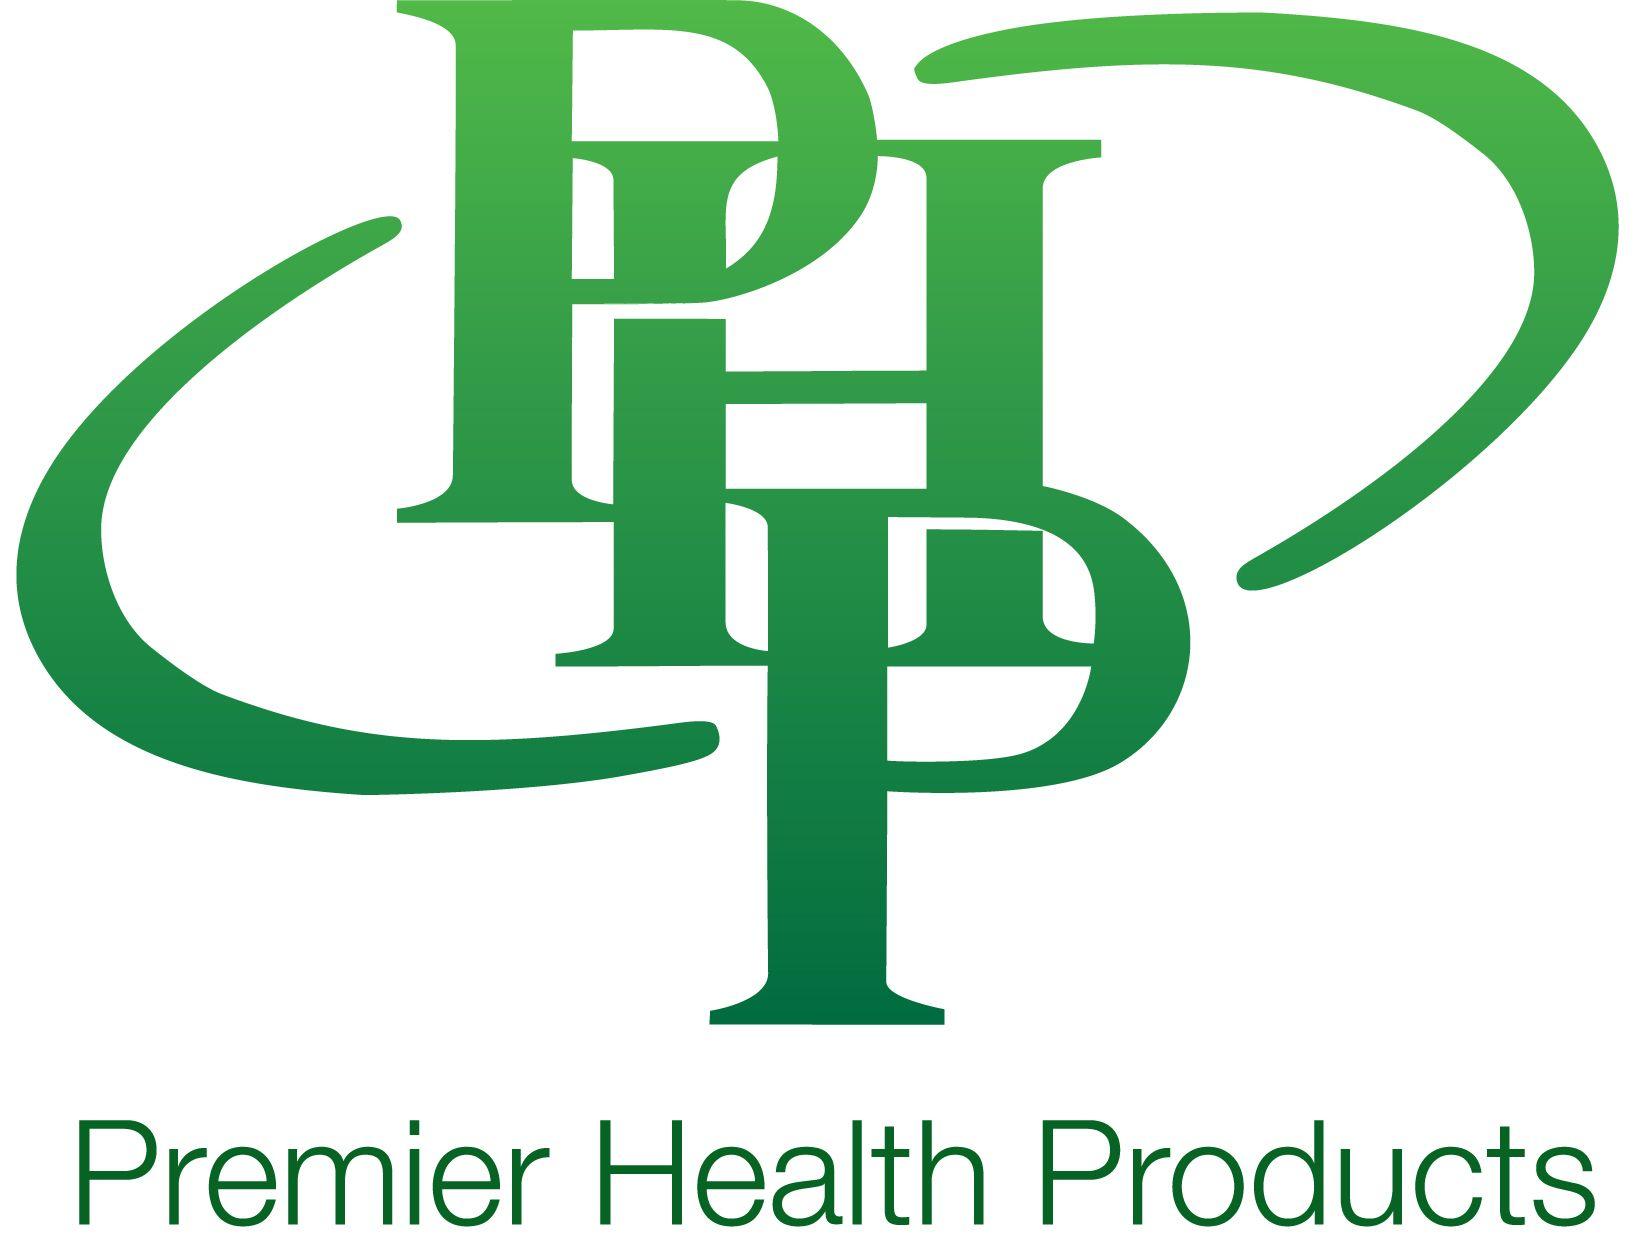 Health Product Logo - Premier Health Products - UK City of Culture 2021, Coventry